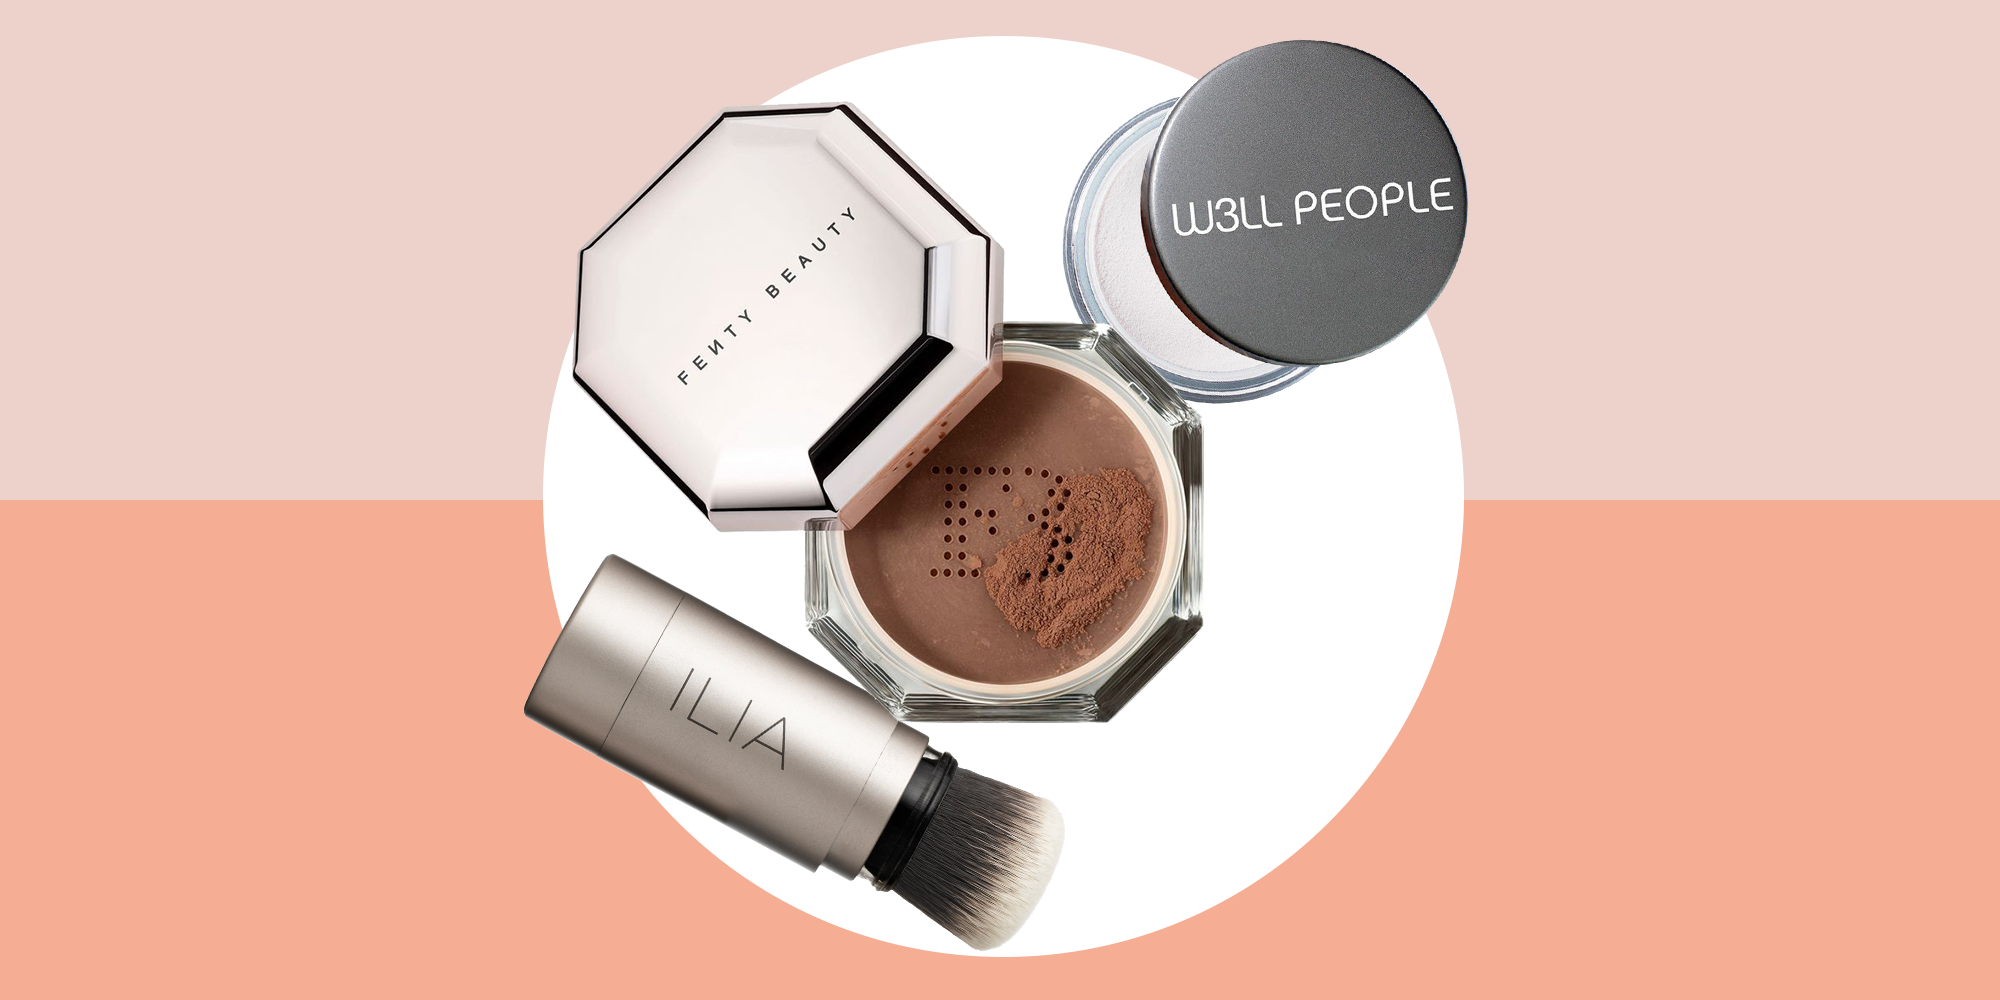 the best setting powder for oily skin